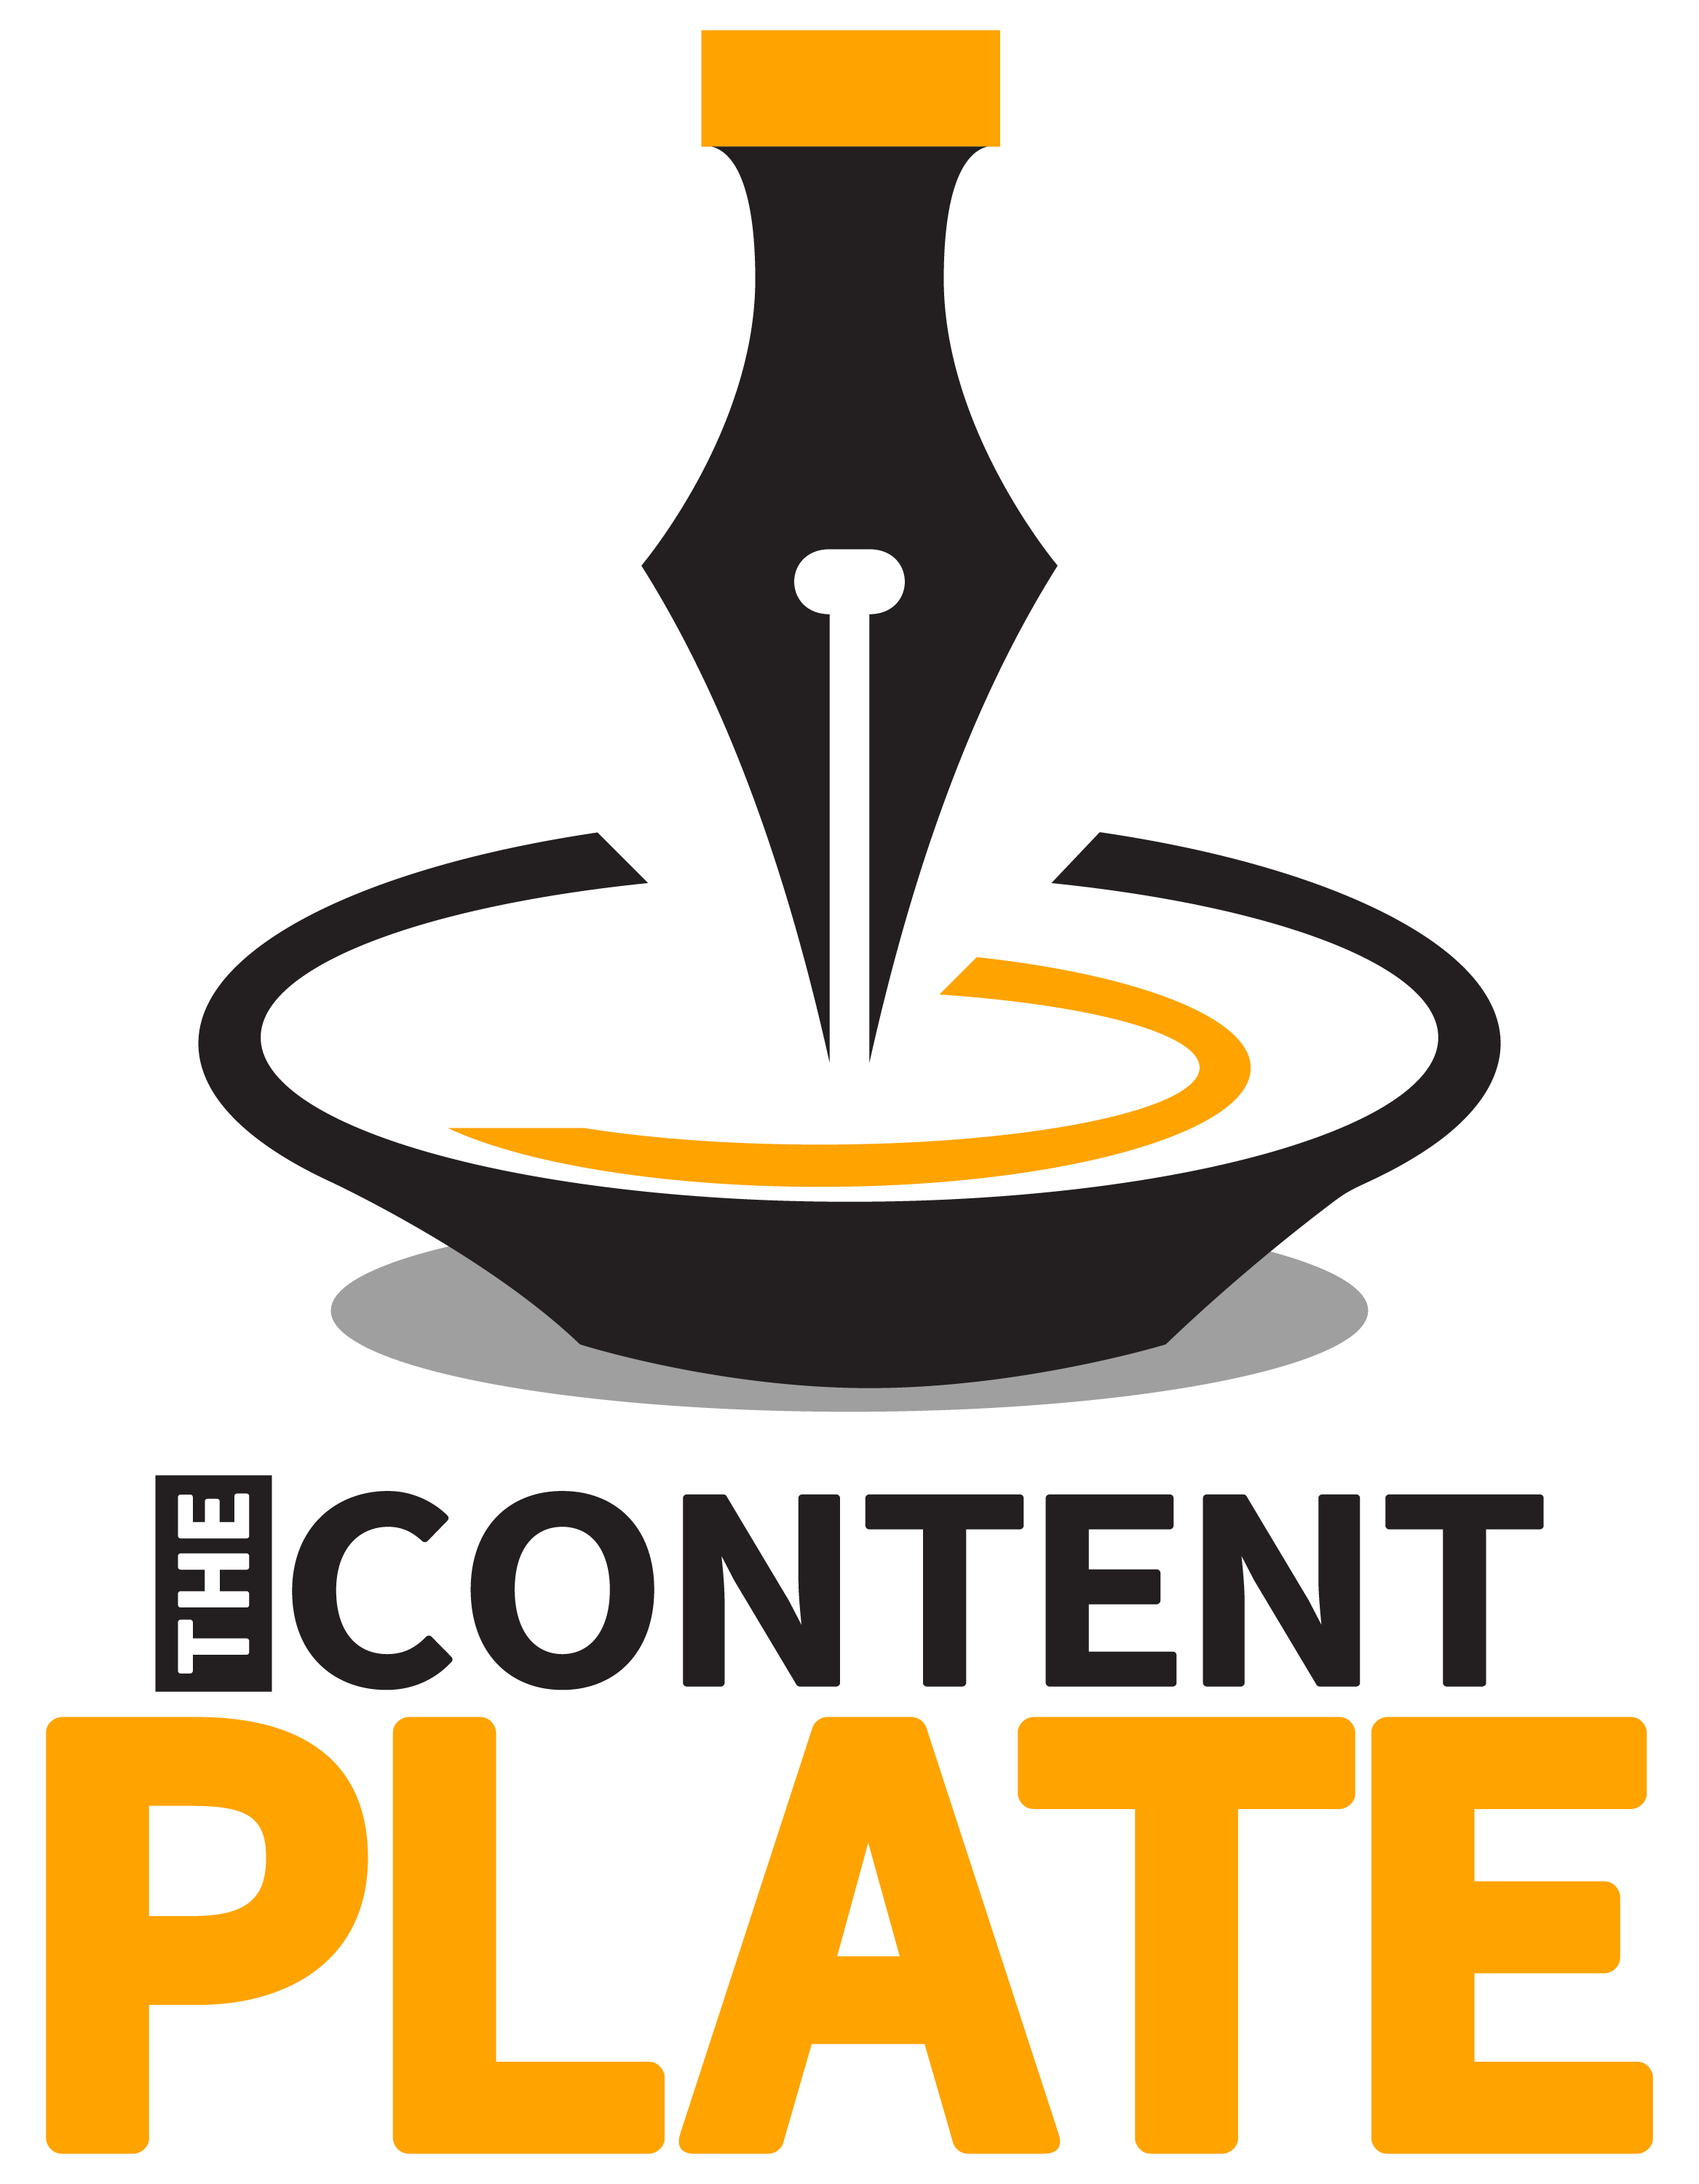 The Content Plate logo